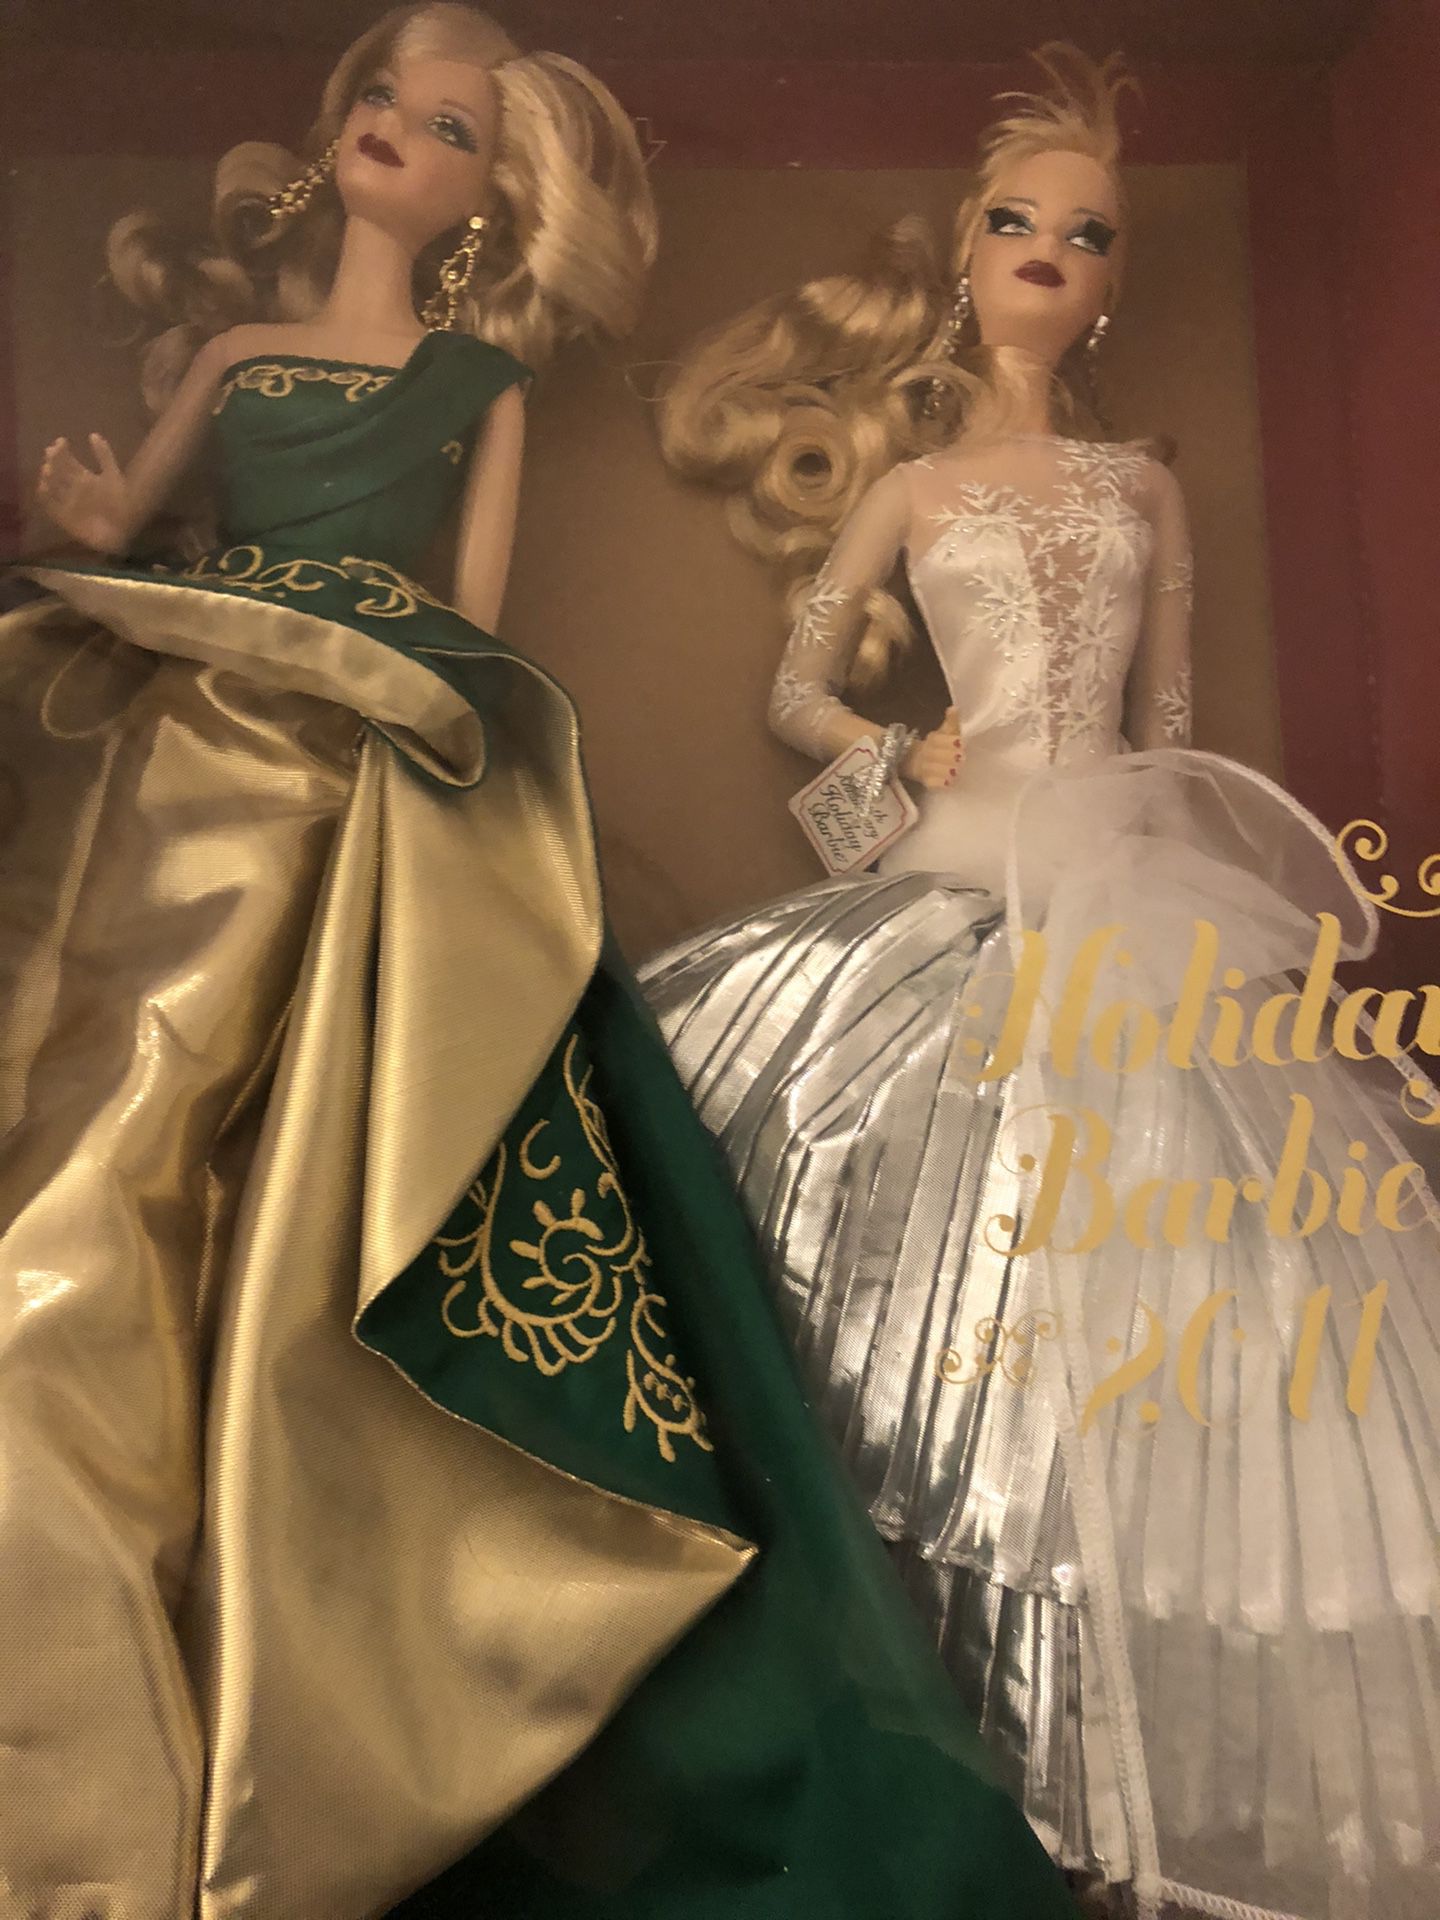 Holliday Barbie both for $30